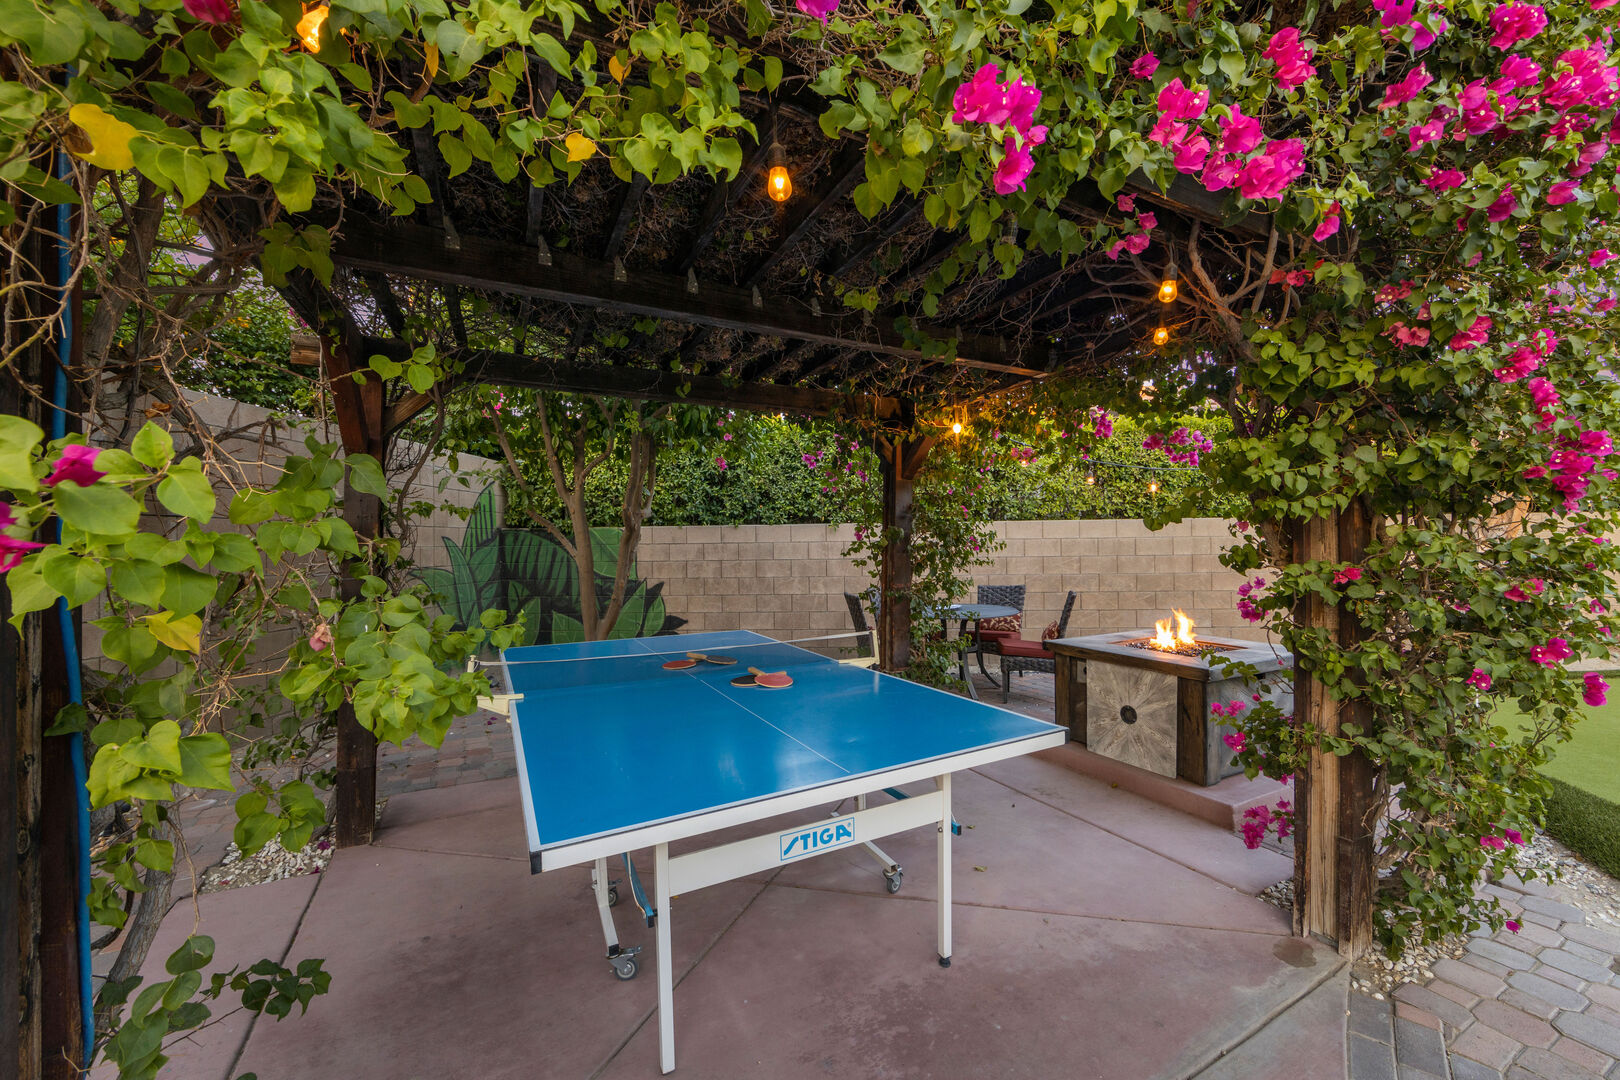 Are you watching the ping pong tournament or the beautiful sunset?